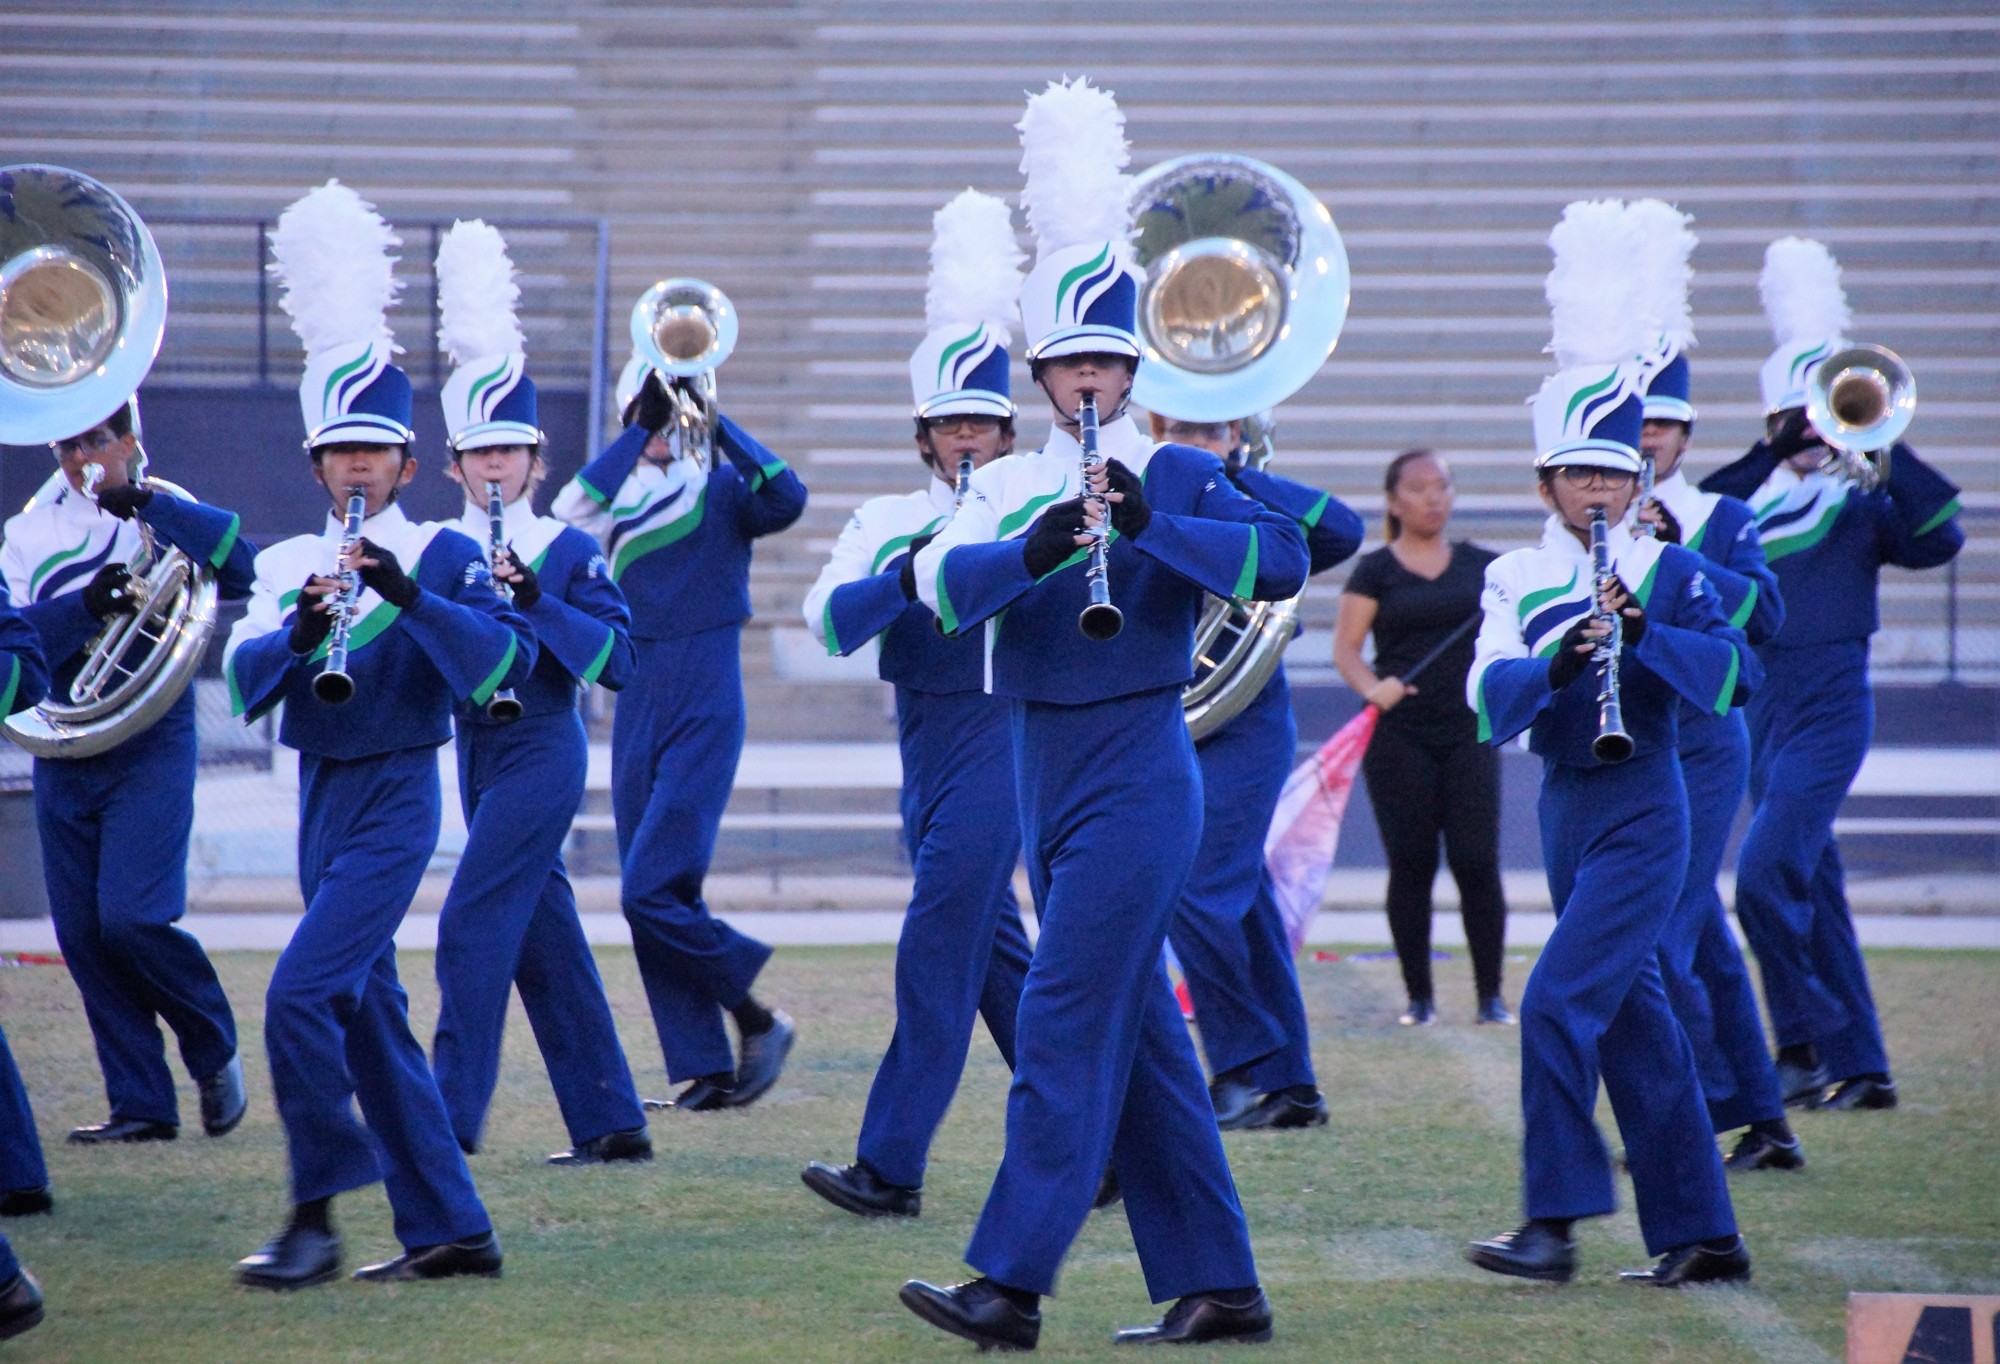 The Windermere Wolverine Band is ready to show the community what it has been working on. (Courtesy Gabriel Cosme)